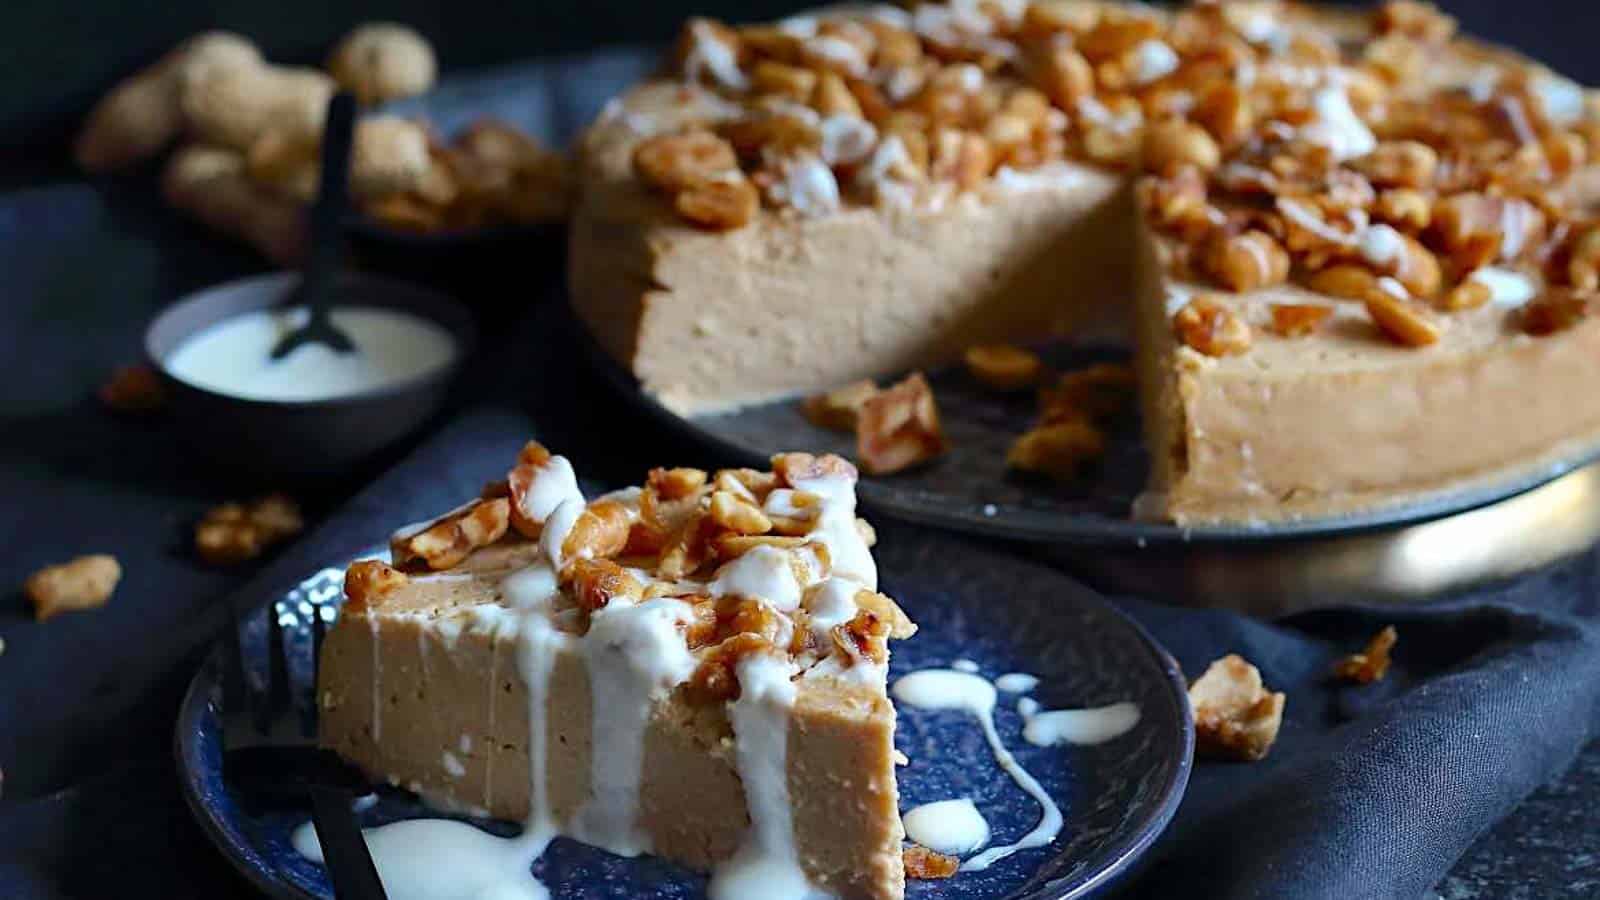 Low Carb Peanut Butter Cheesecake. Photo credit: Low Carb – No Carb.